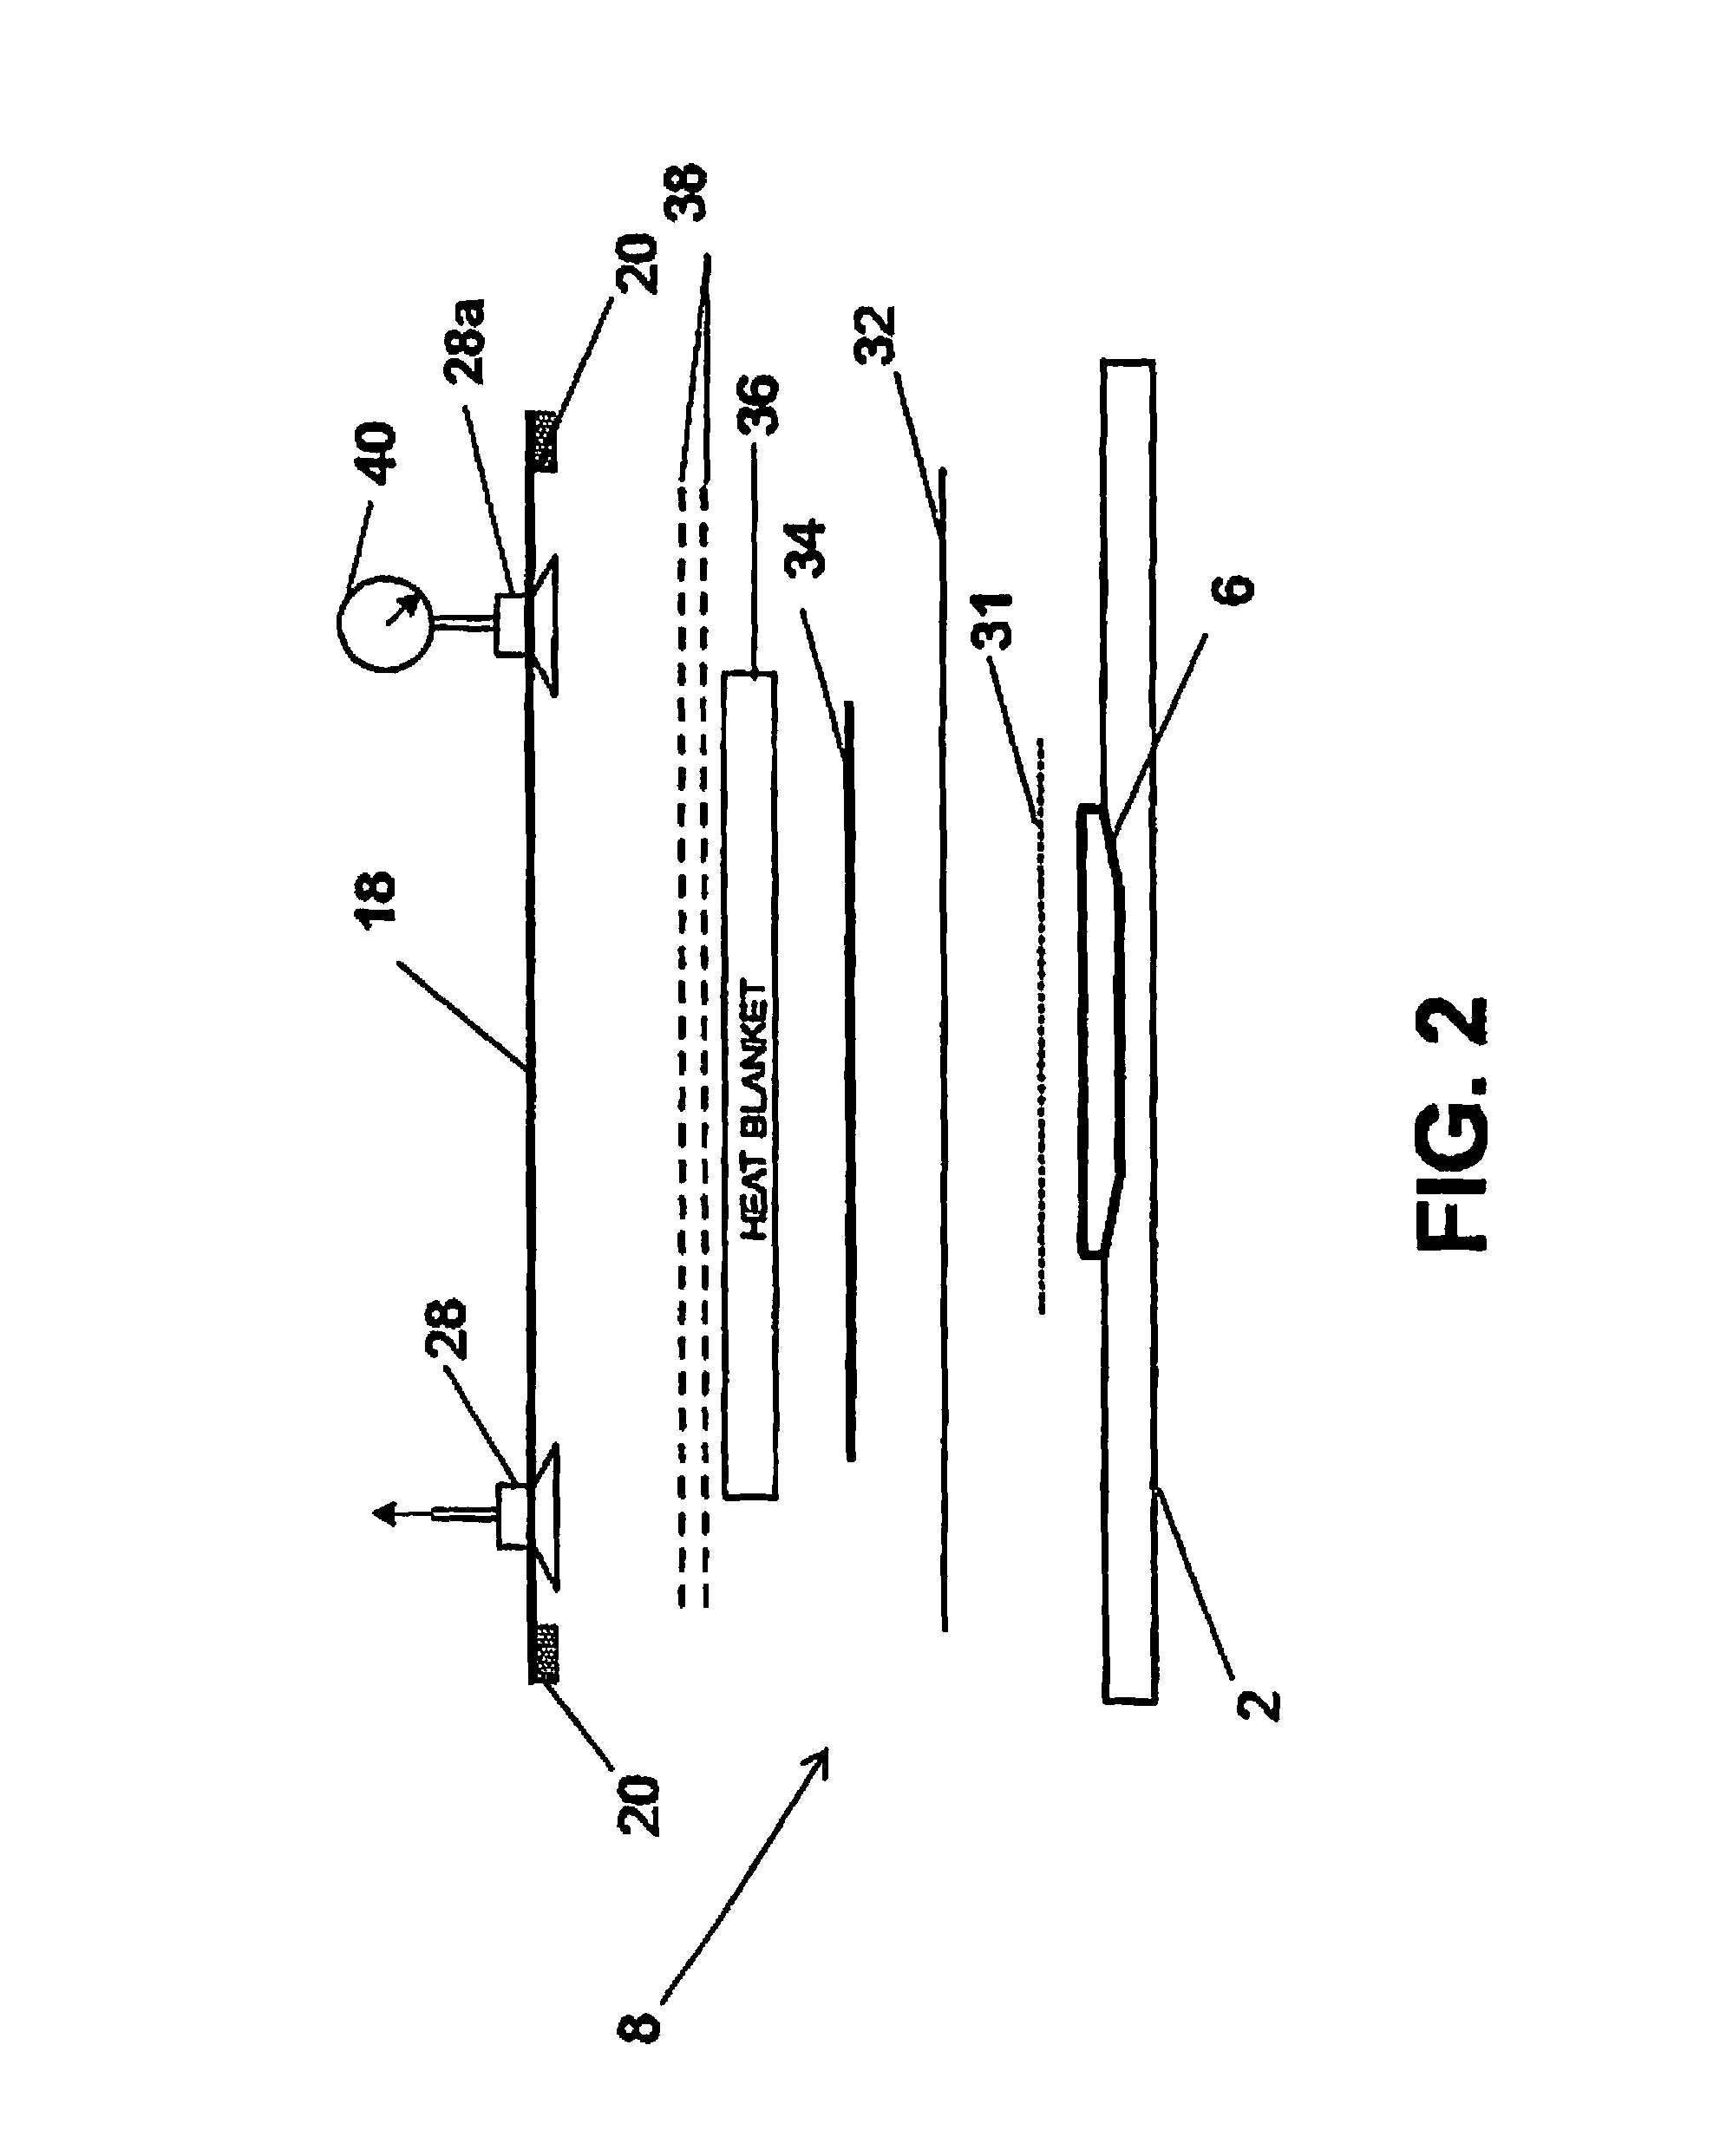 Systems and methods for on-aircraft composite repair using double vacuum debulking